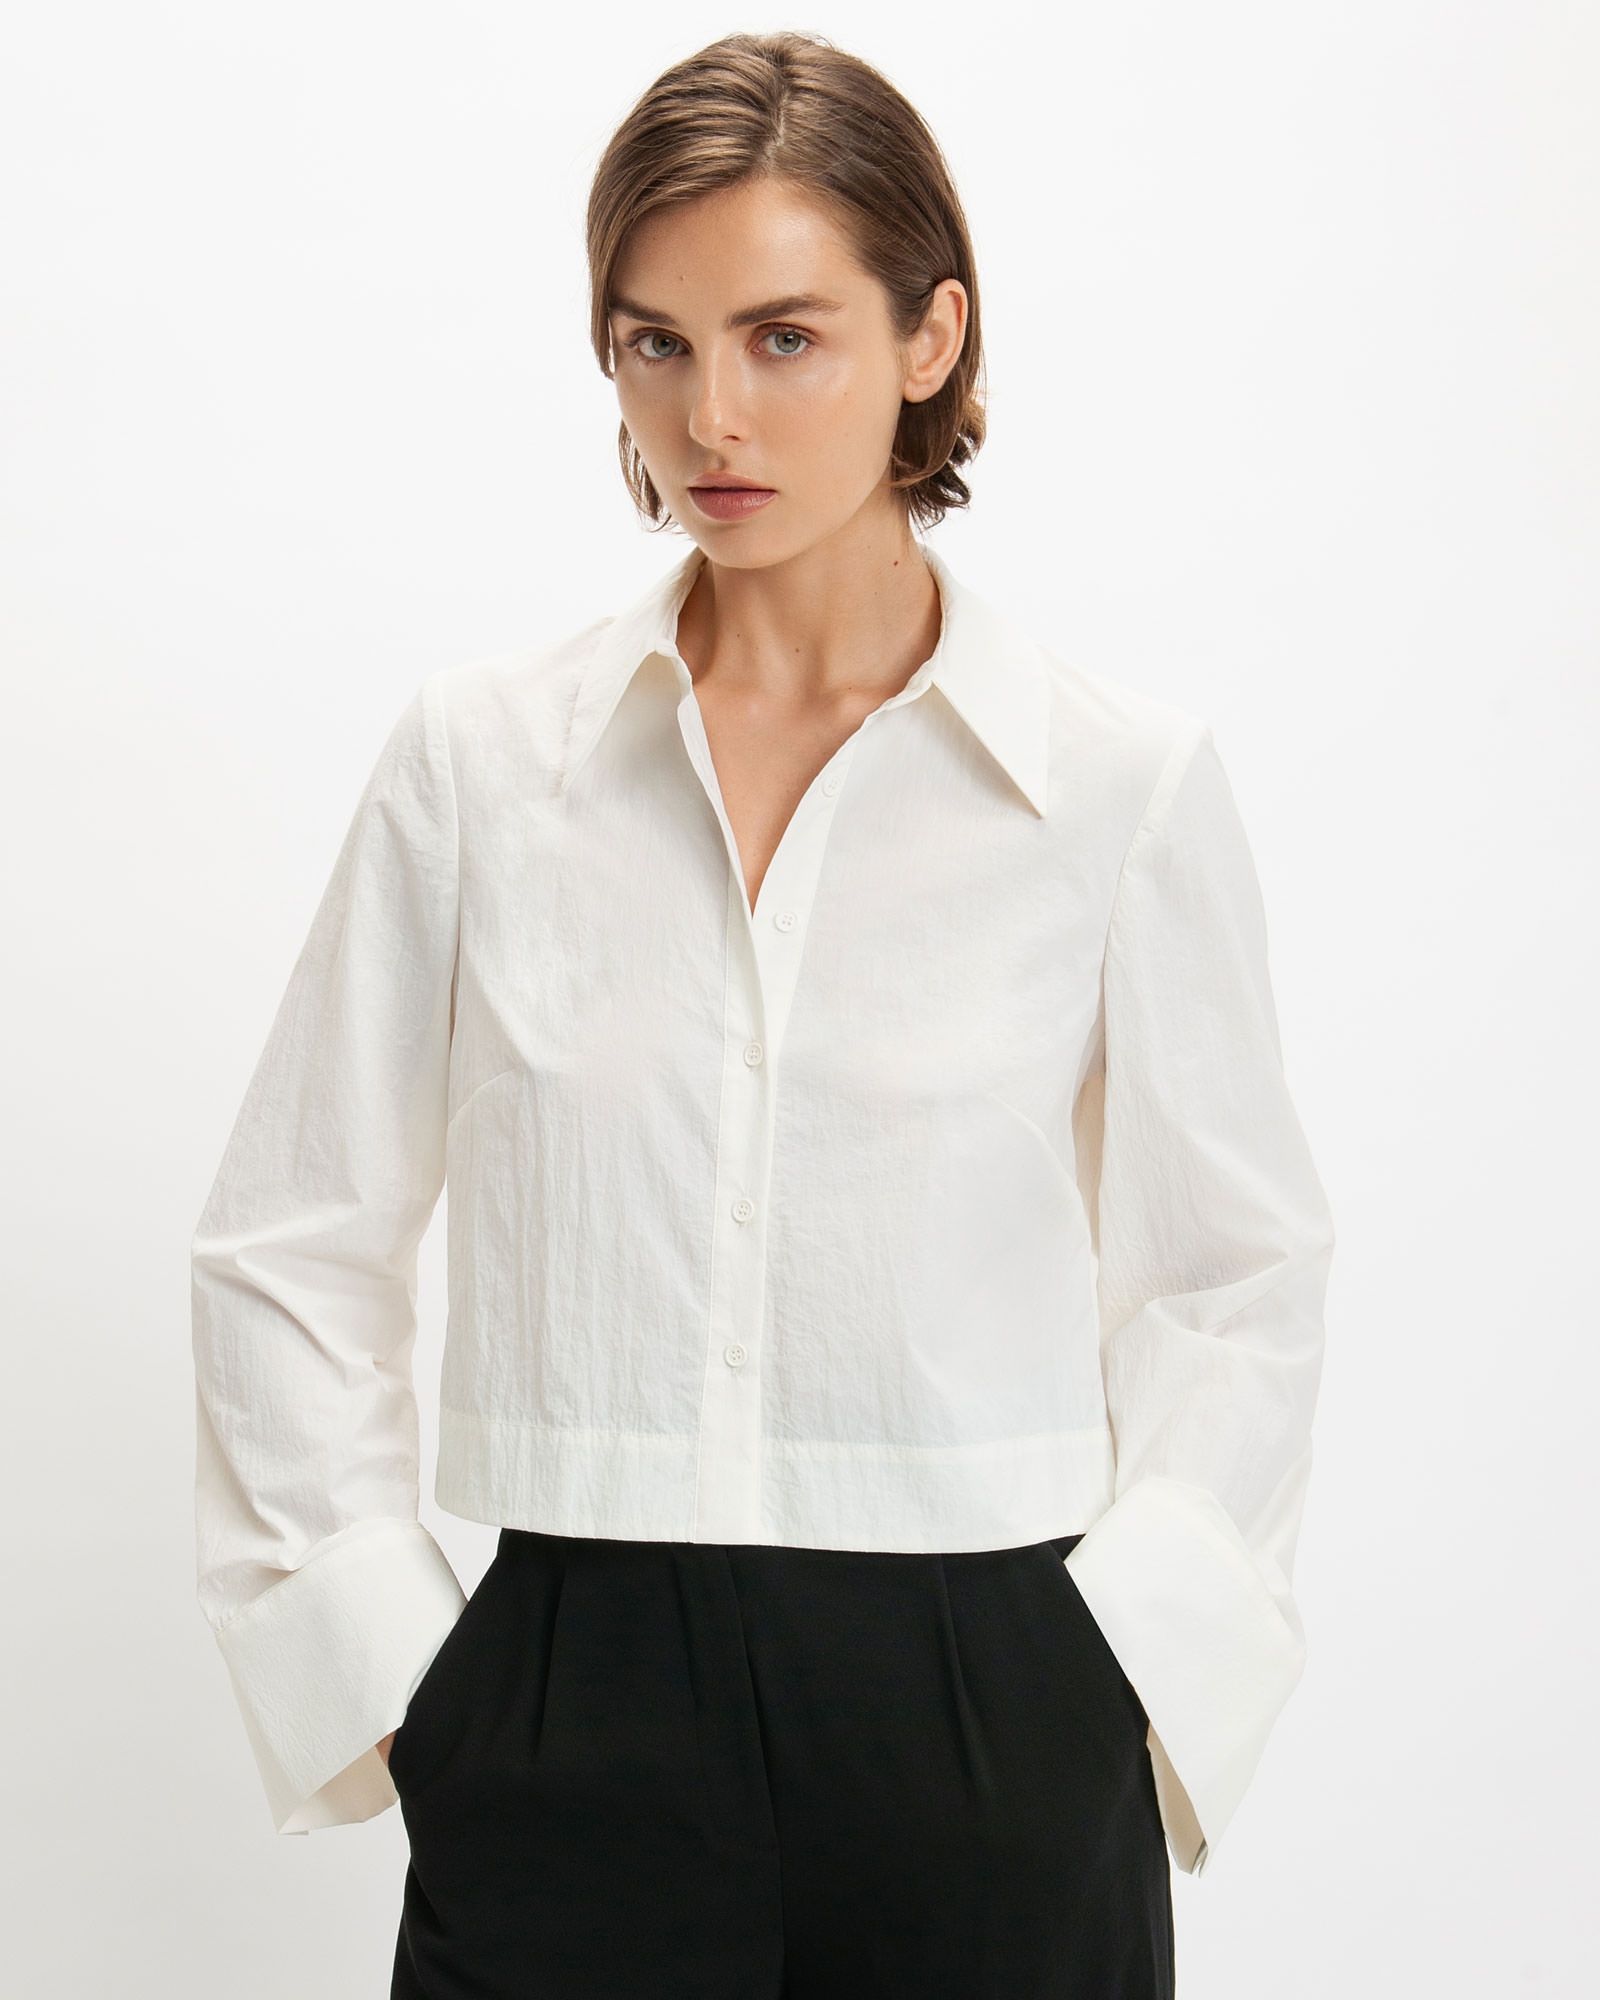 Cropped Nylon Shirt | Buy Tops and Shirts Online - Cue